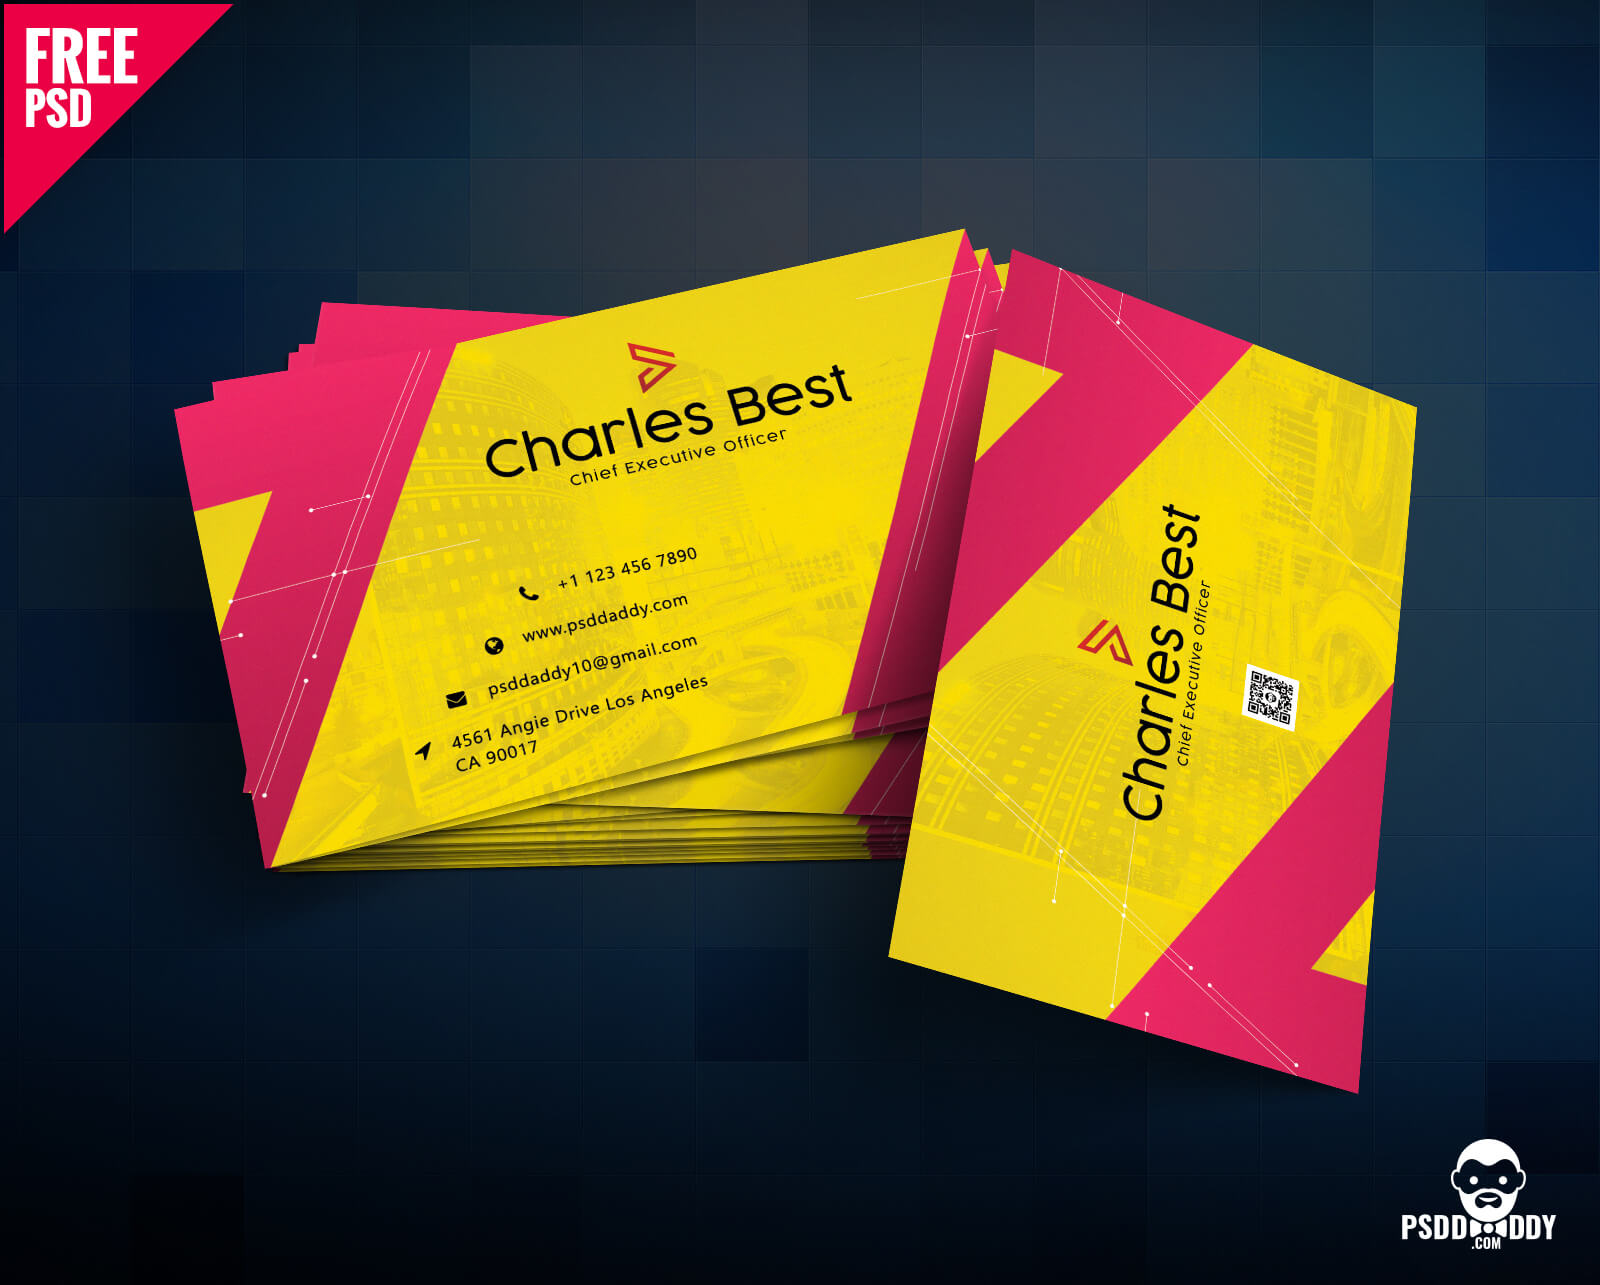 Download] Creative Business Card Free Psd | Psddaddy In Calling Card Template Psd